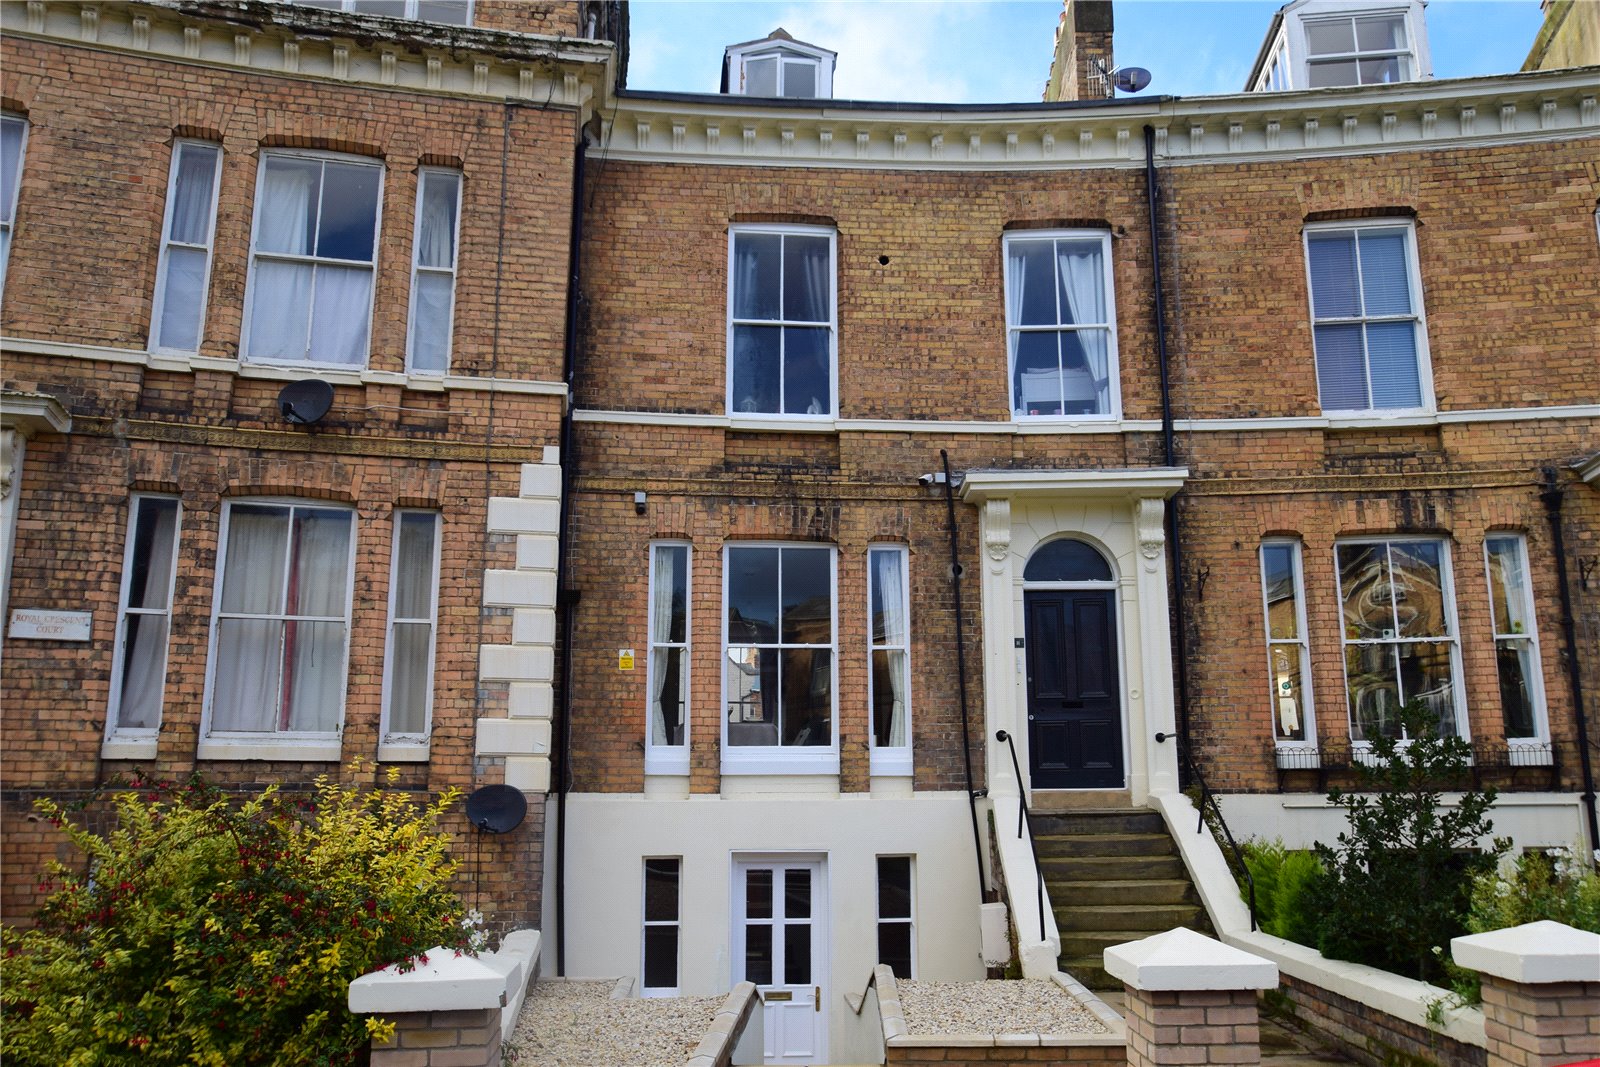 2 bed apartment to rent in Royal Crescent, Scarborough - Property Image 1